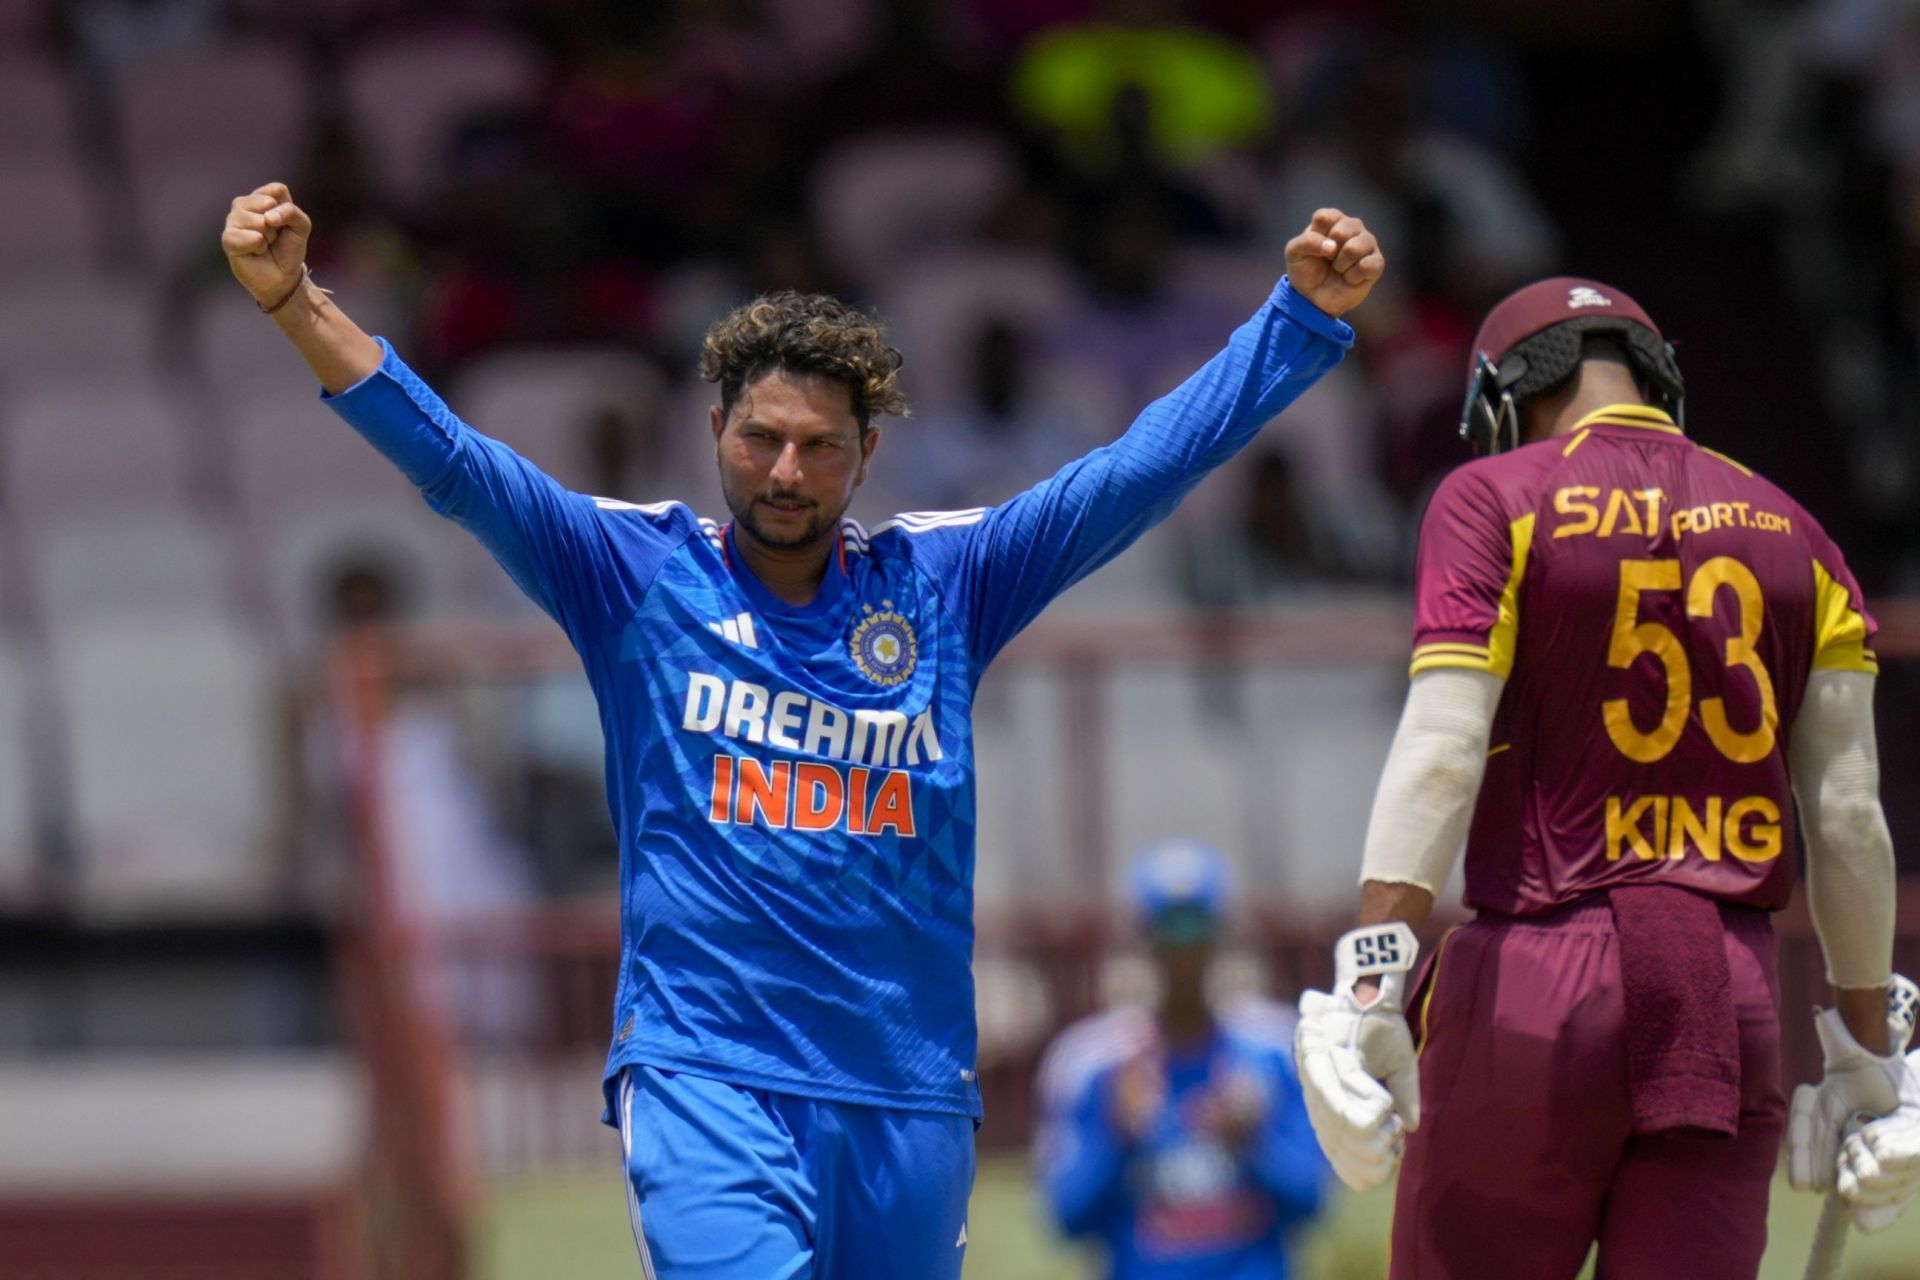 Kuldeep Yadav - the joint-highest wicket-taker in the series [Getty Images]